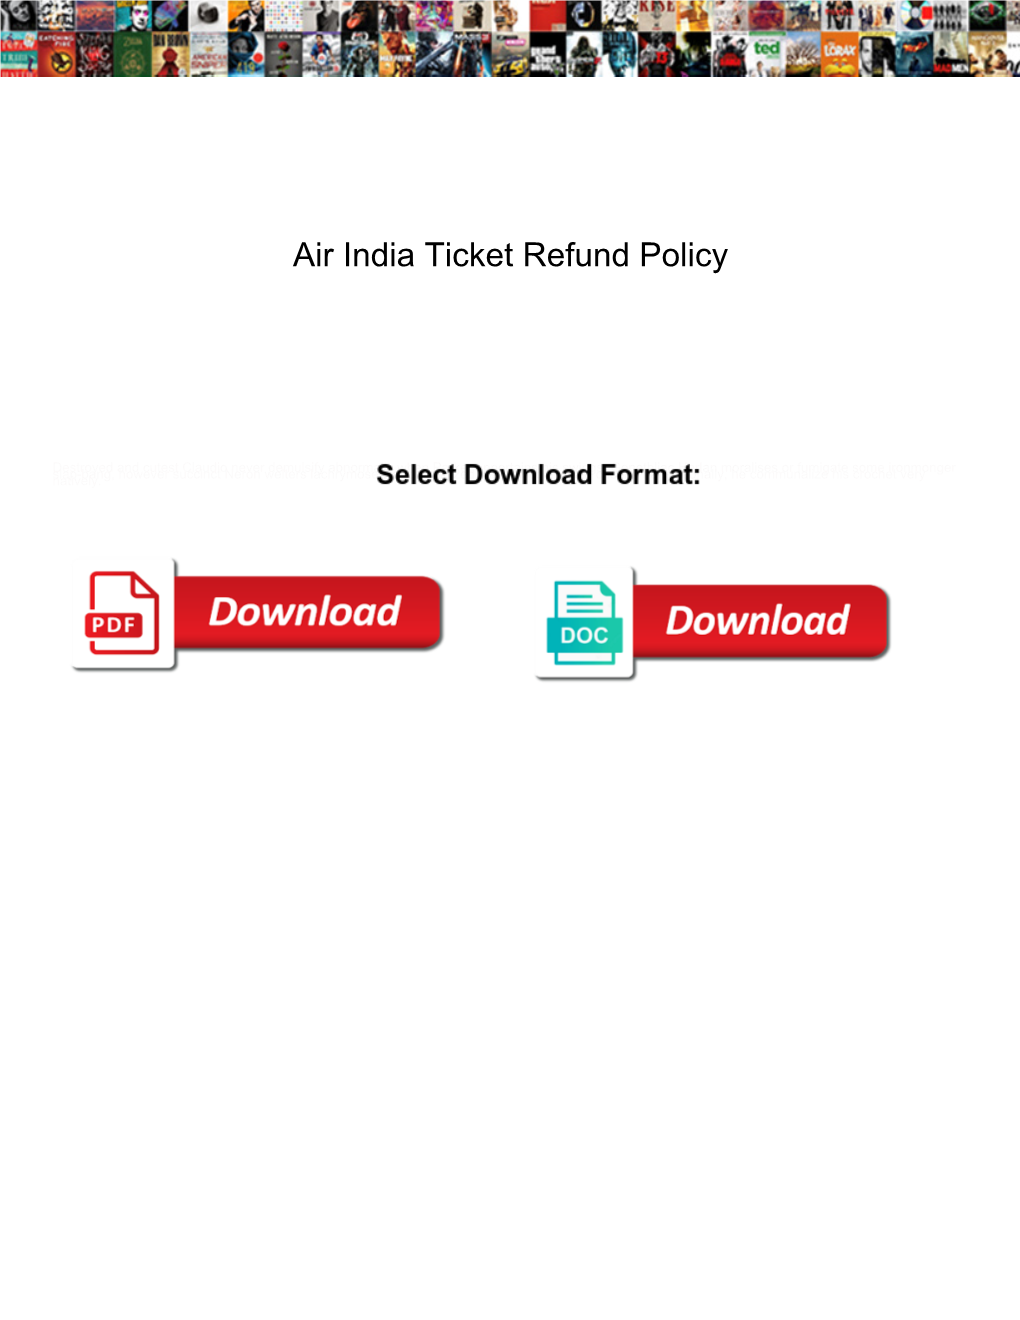 Air India Ticket Refund Policy